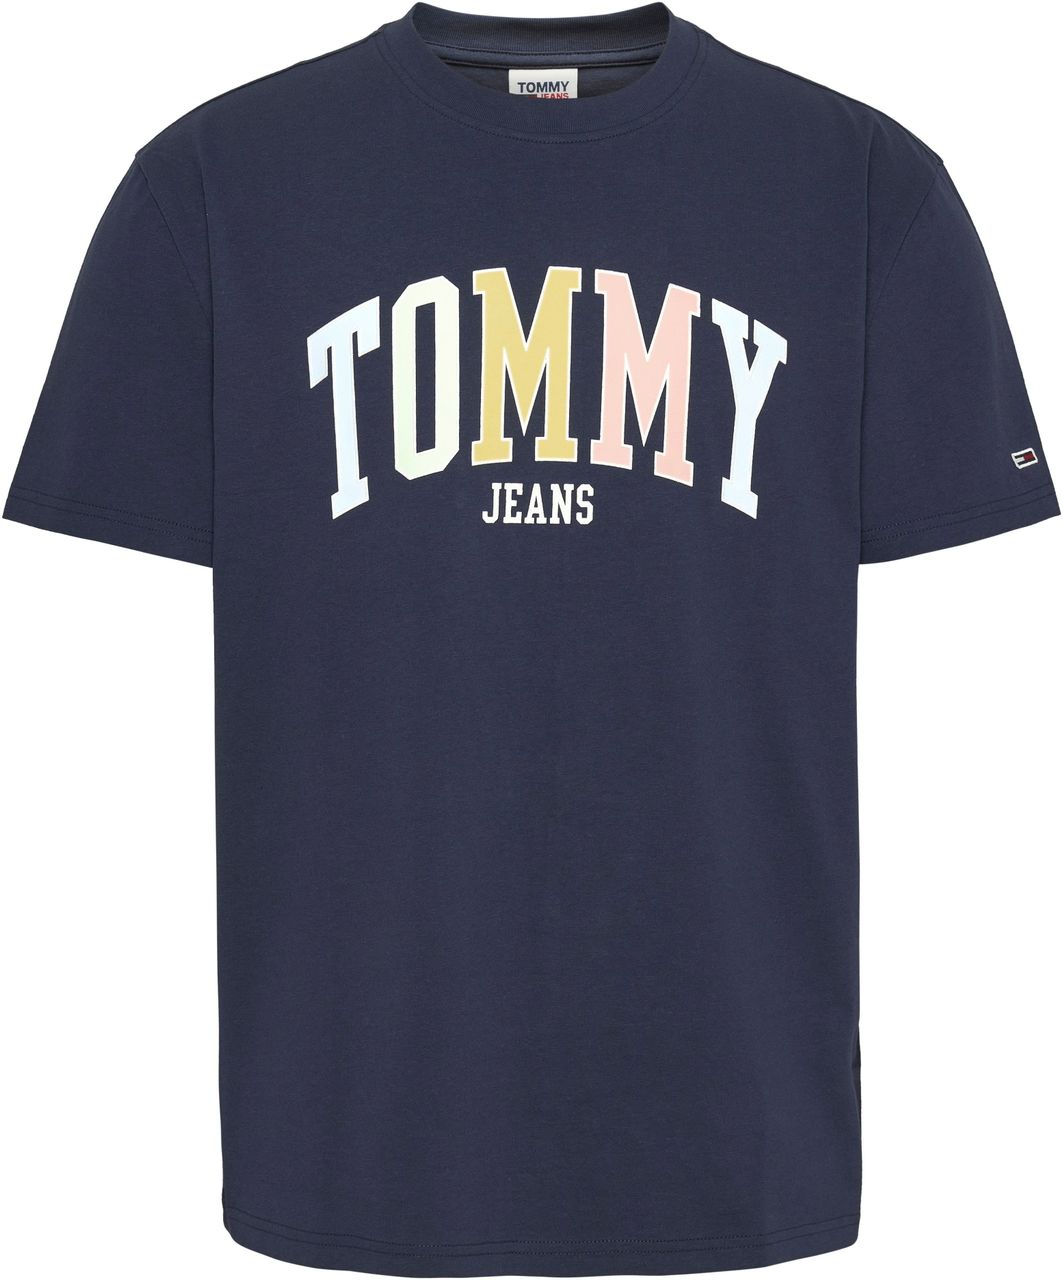 Tommy Hilfiger Mens Classic Collage Pop Tommy T-Shirt Navy Blue DM16401 400